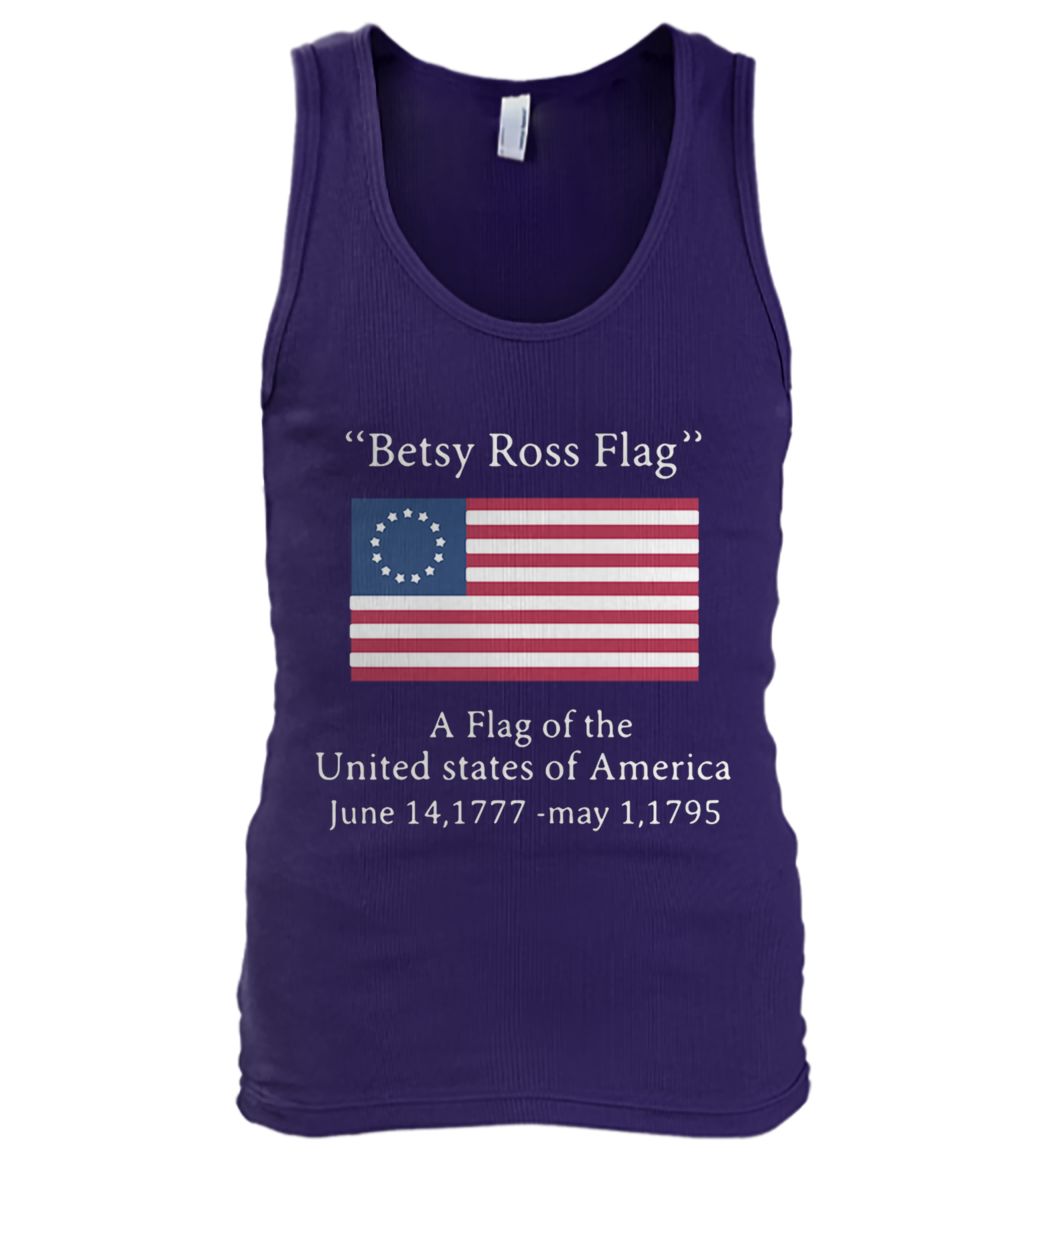 Betsy ross flag a flag of the united states of america men's tank top